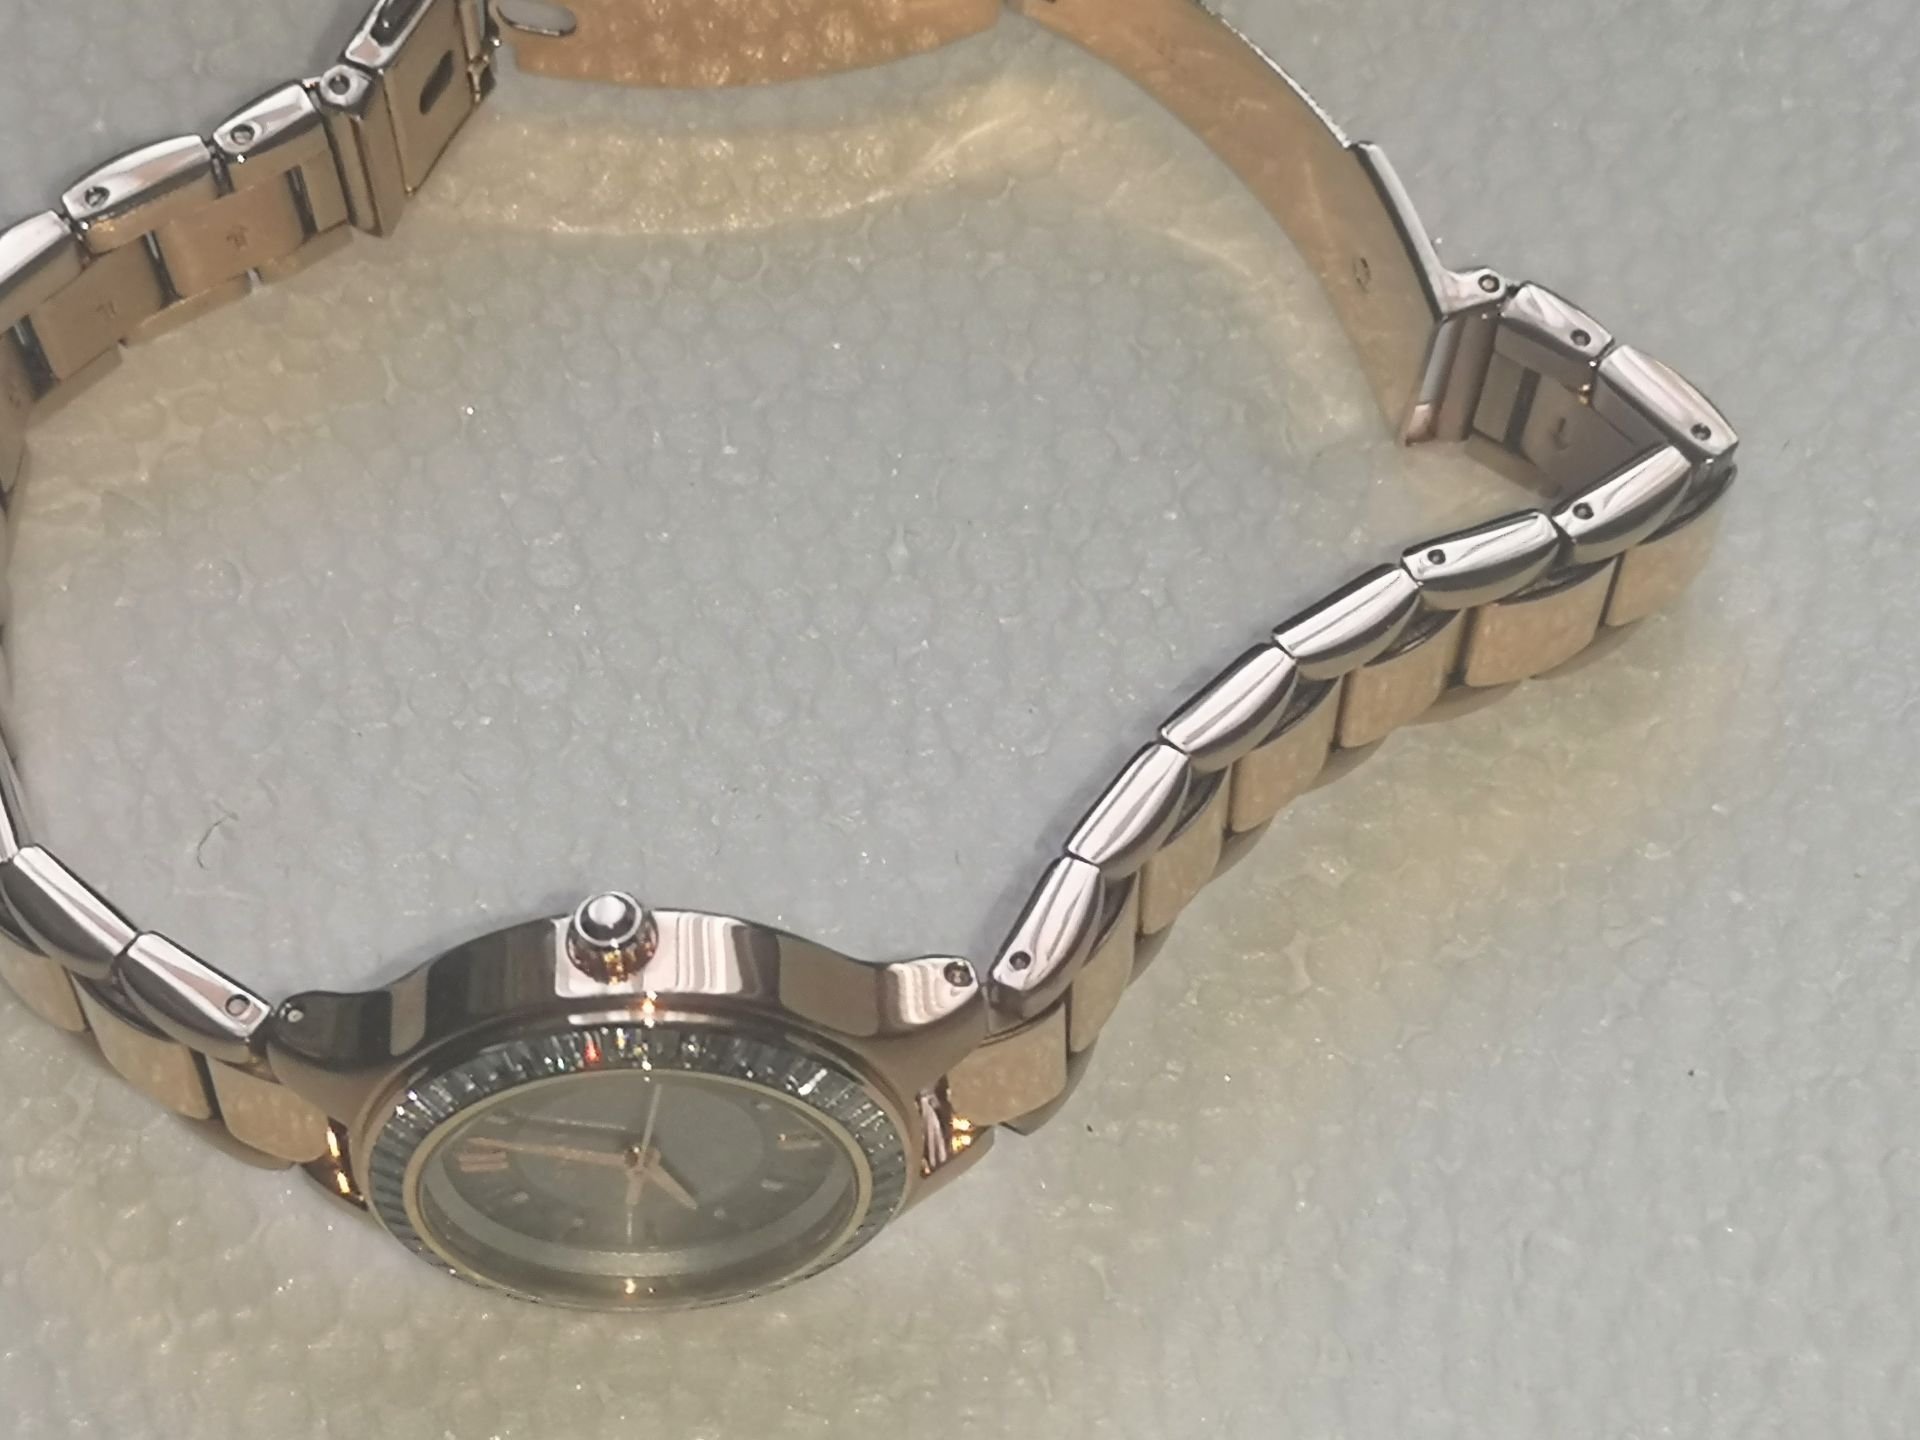 Dkny Womens Analogue Quartz Watch With Stainless Steel Strap Ny2393 - Image 2 of 8